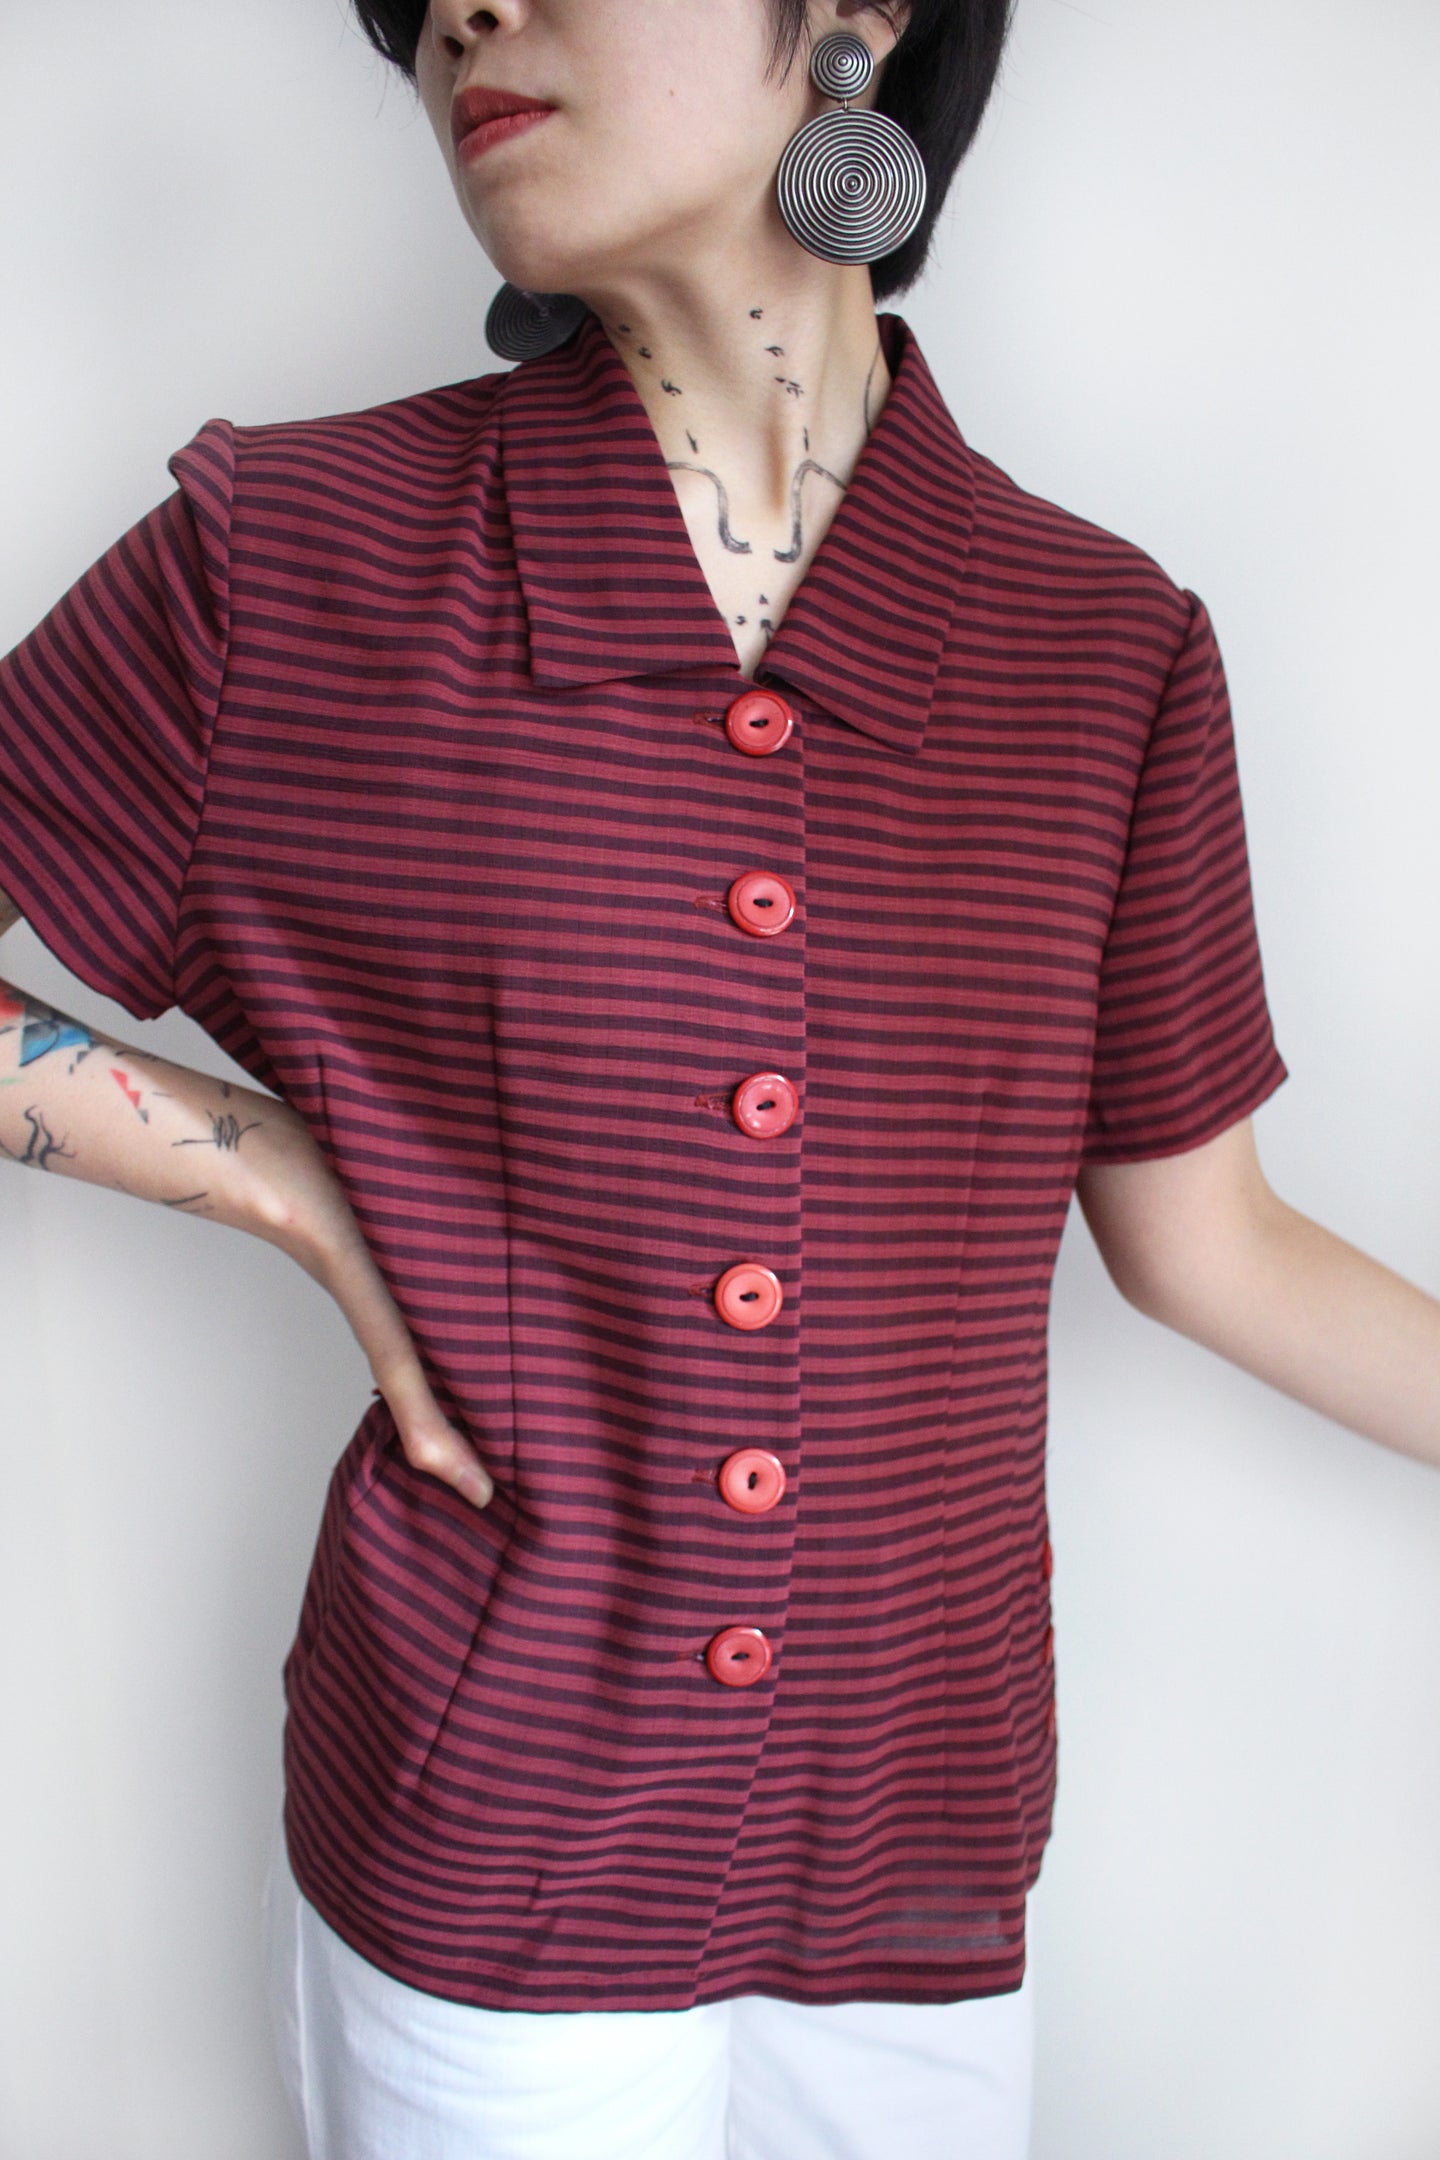 CHERRY RED STRIPED TOP